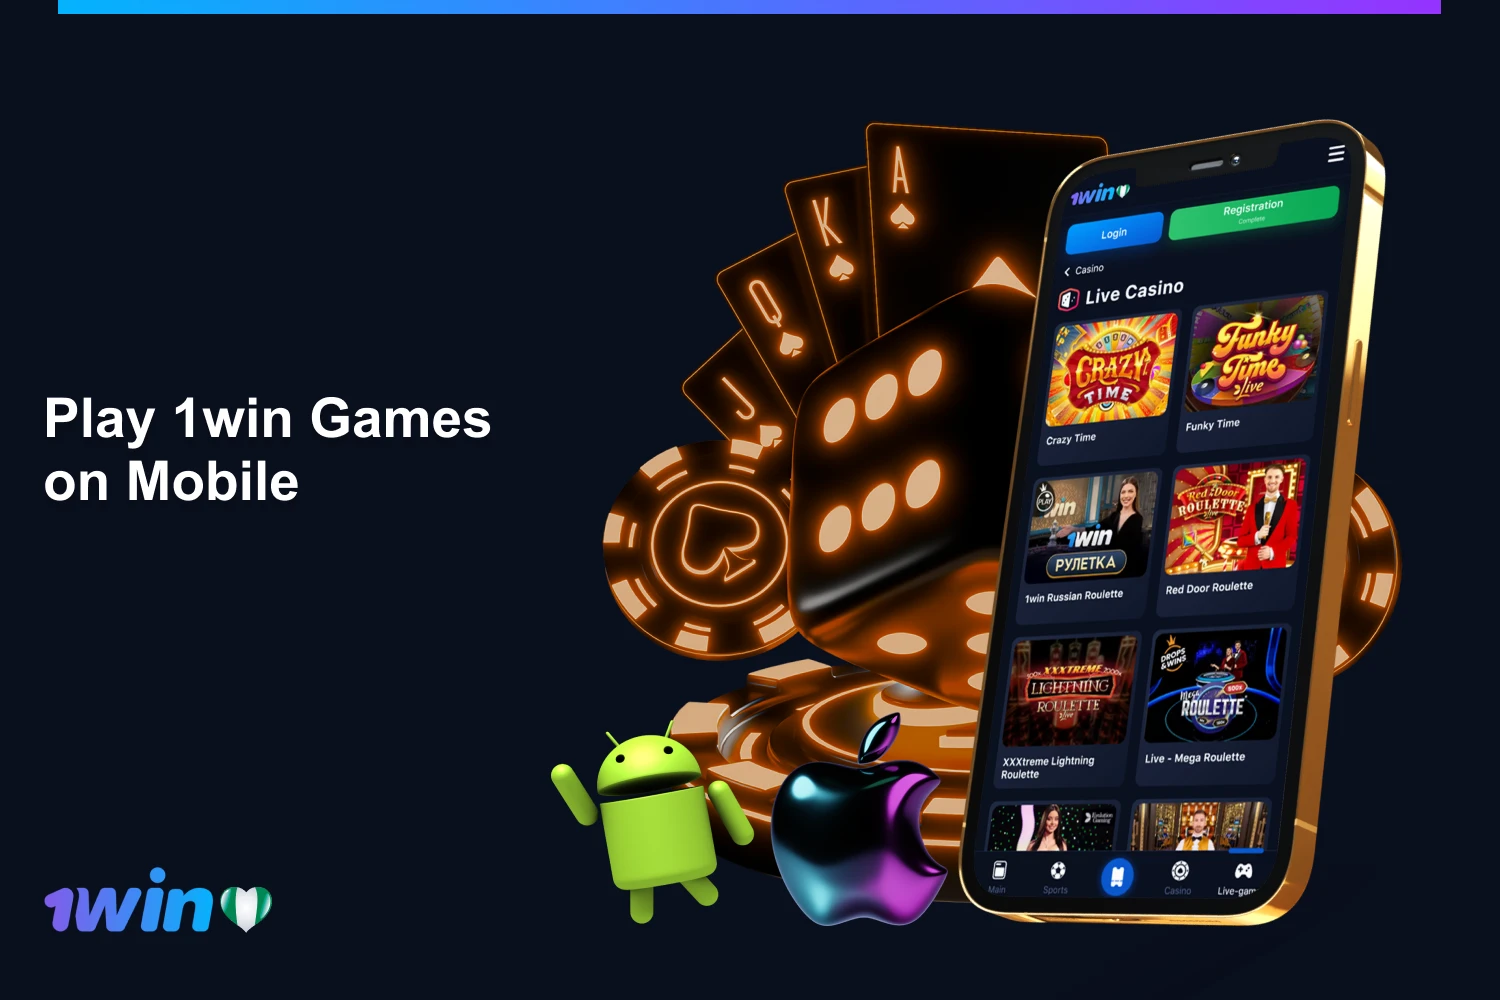 The 1win website gives Nigerians the opportunity to download a user-friendly mobile app for casino games